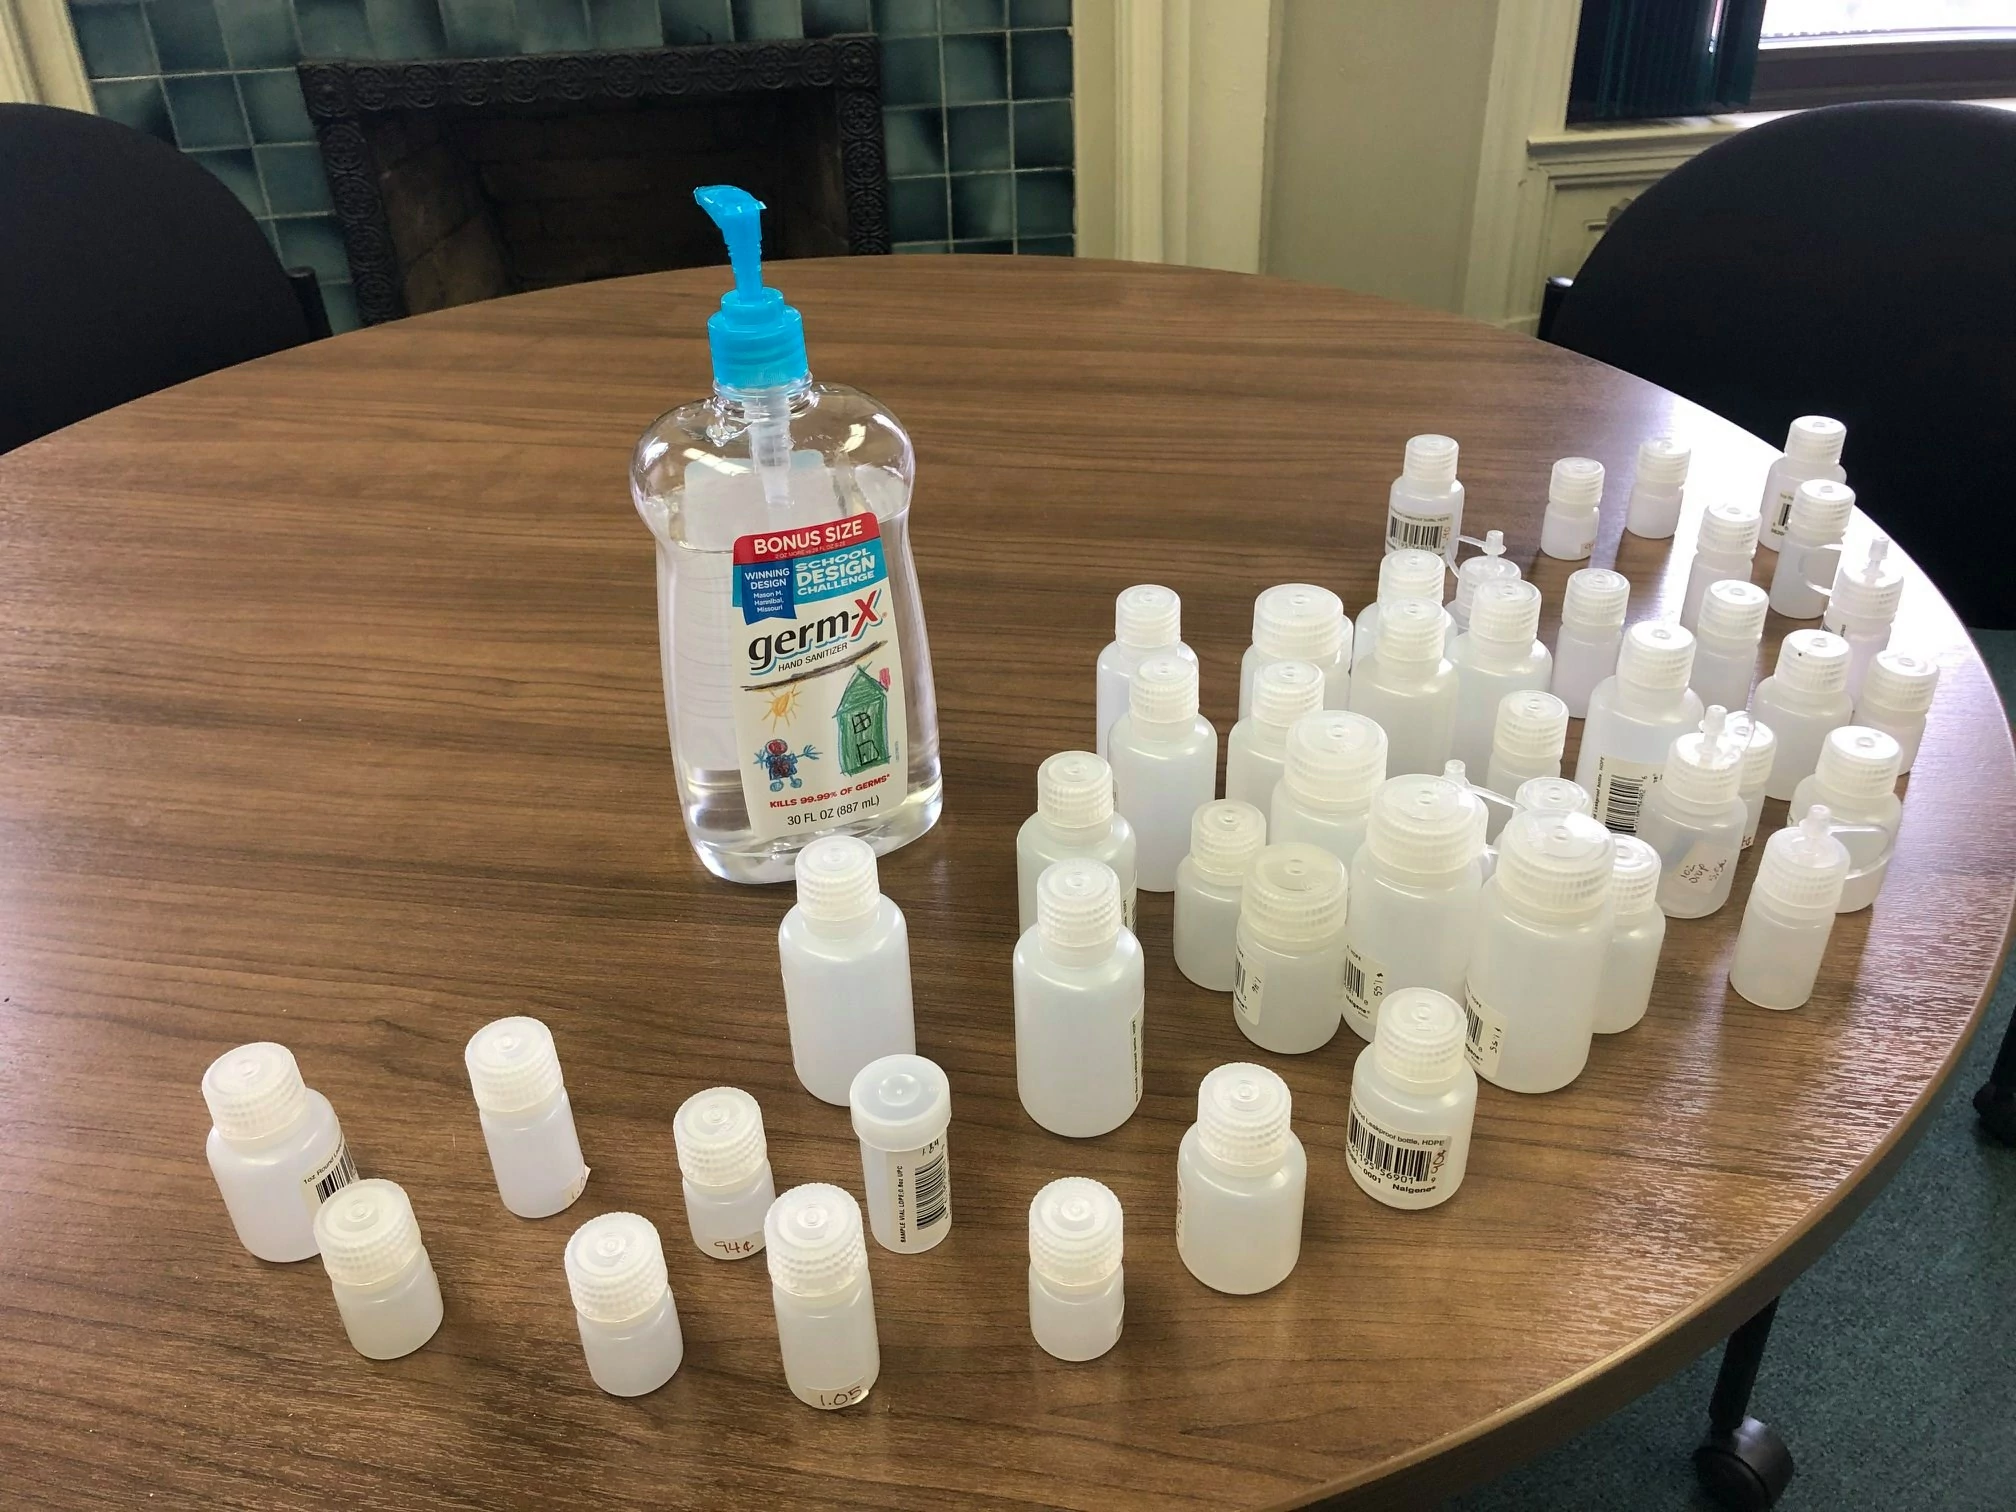 Special THANKS and SHOUT OUT to Piper VanOrd and Allegheny Outfitters for donating these bottles today! They will be put to good use! We are divvying up hand sanitizer for our Caregivers!